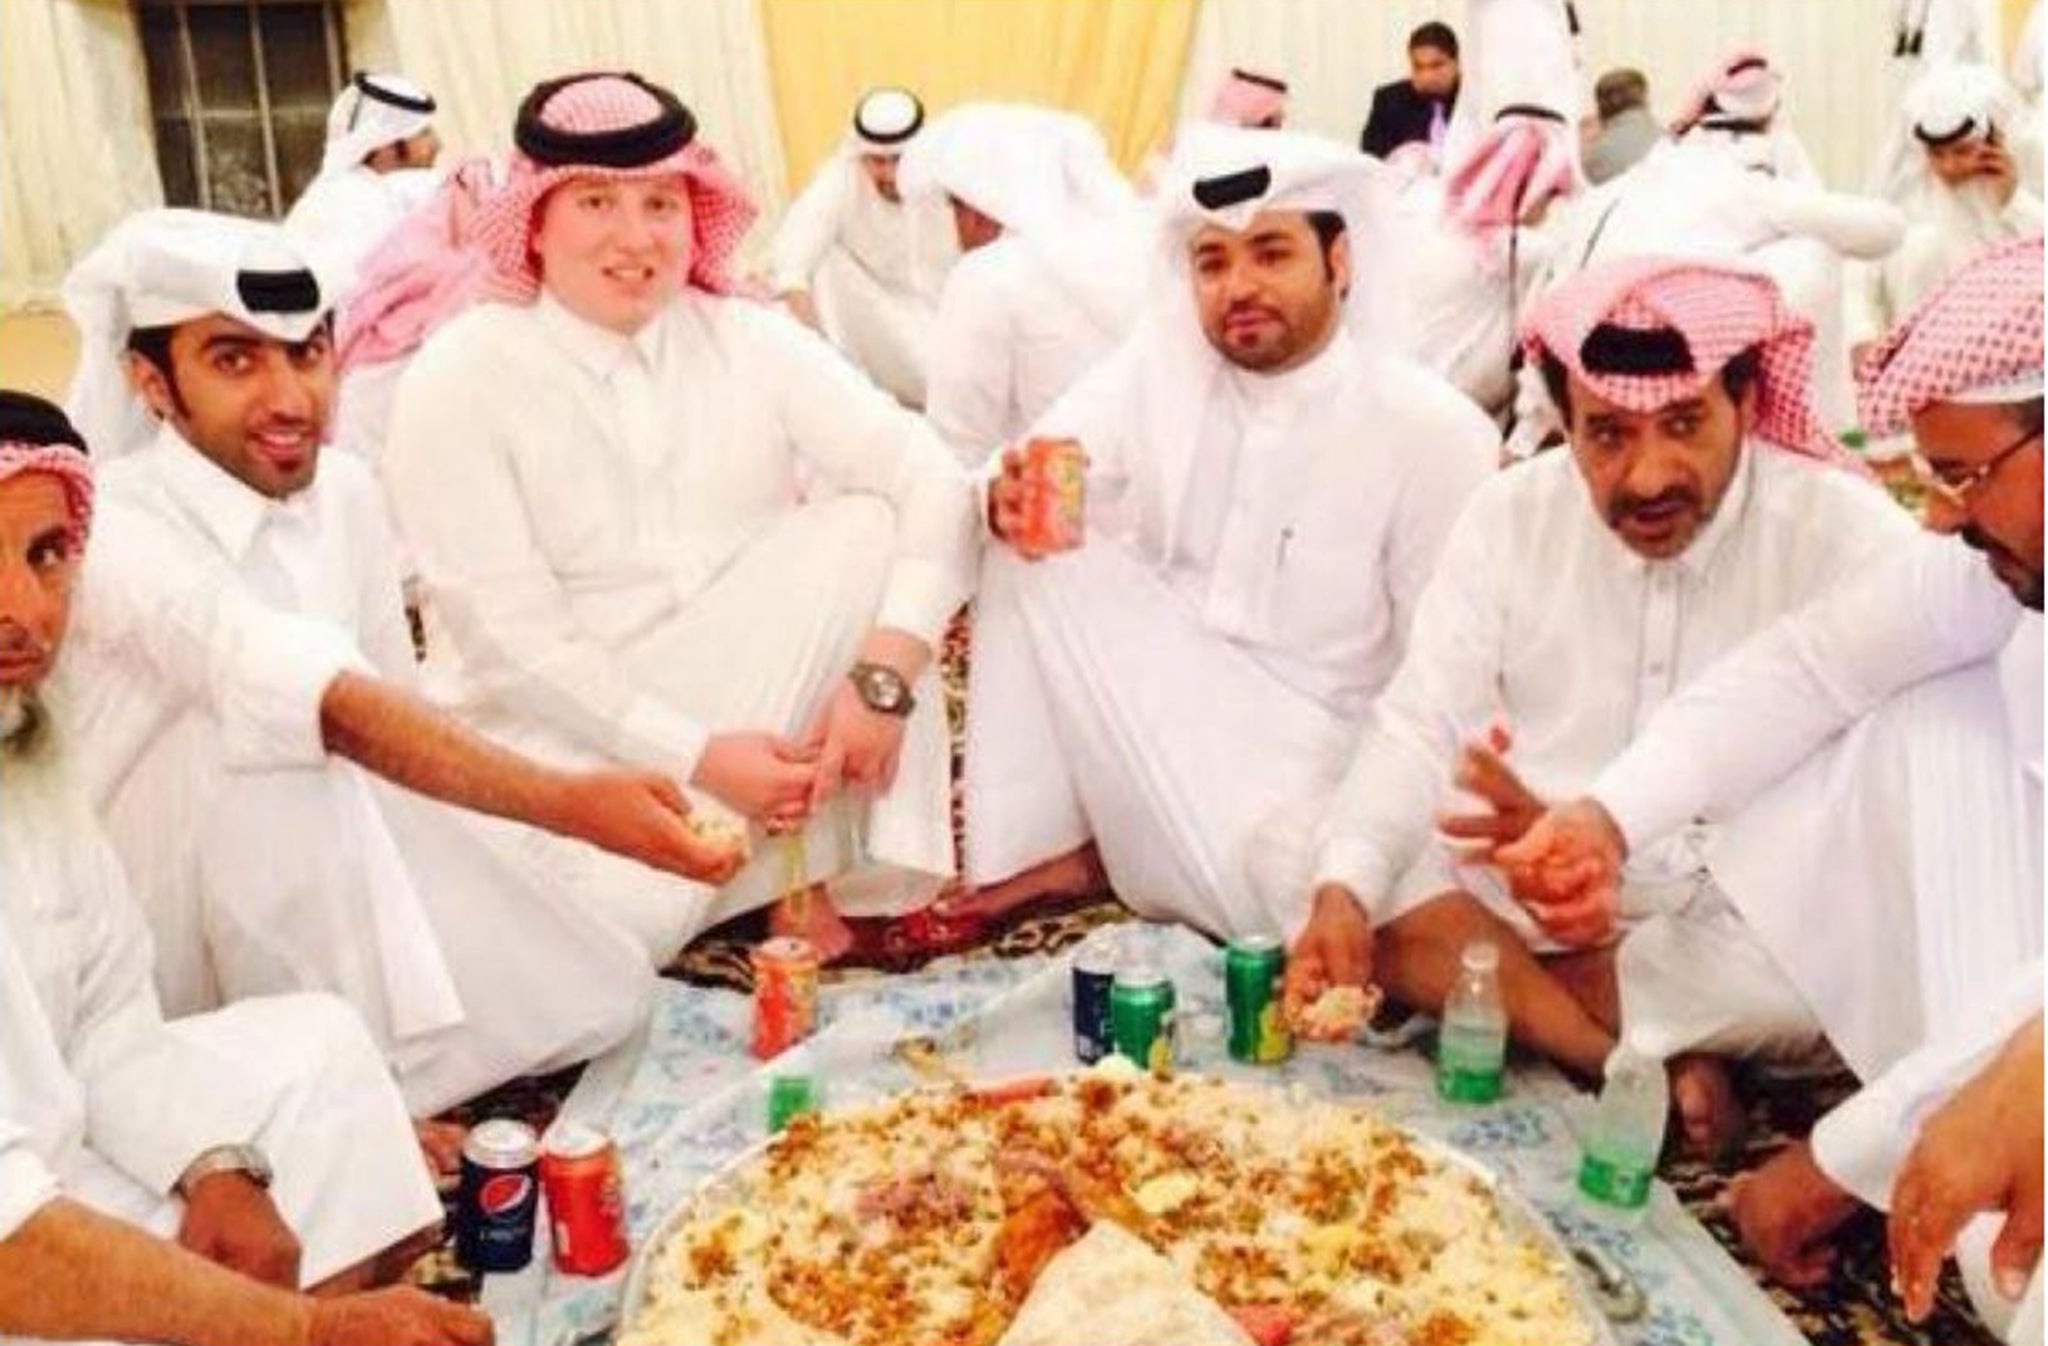 Joshua Van Alstine at a traditional meal after sundown during the Islamic holy month of Ramadan.